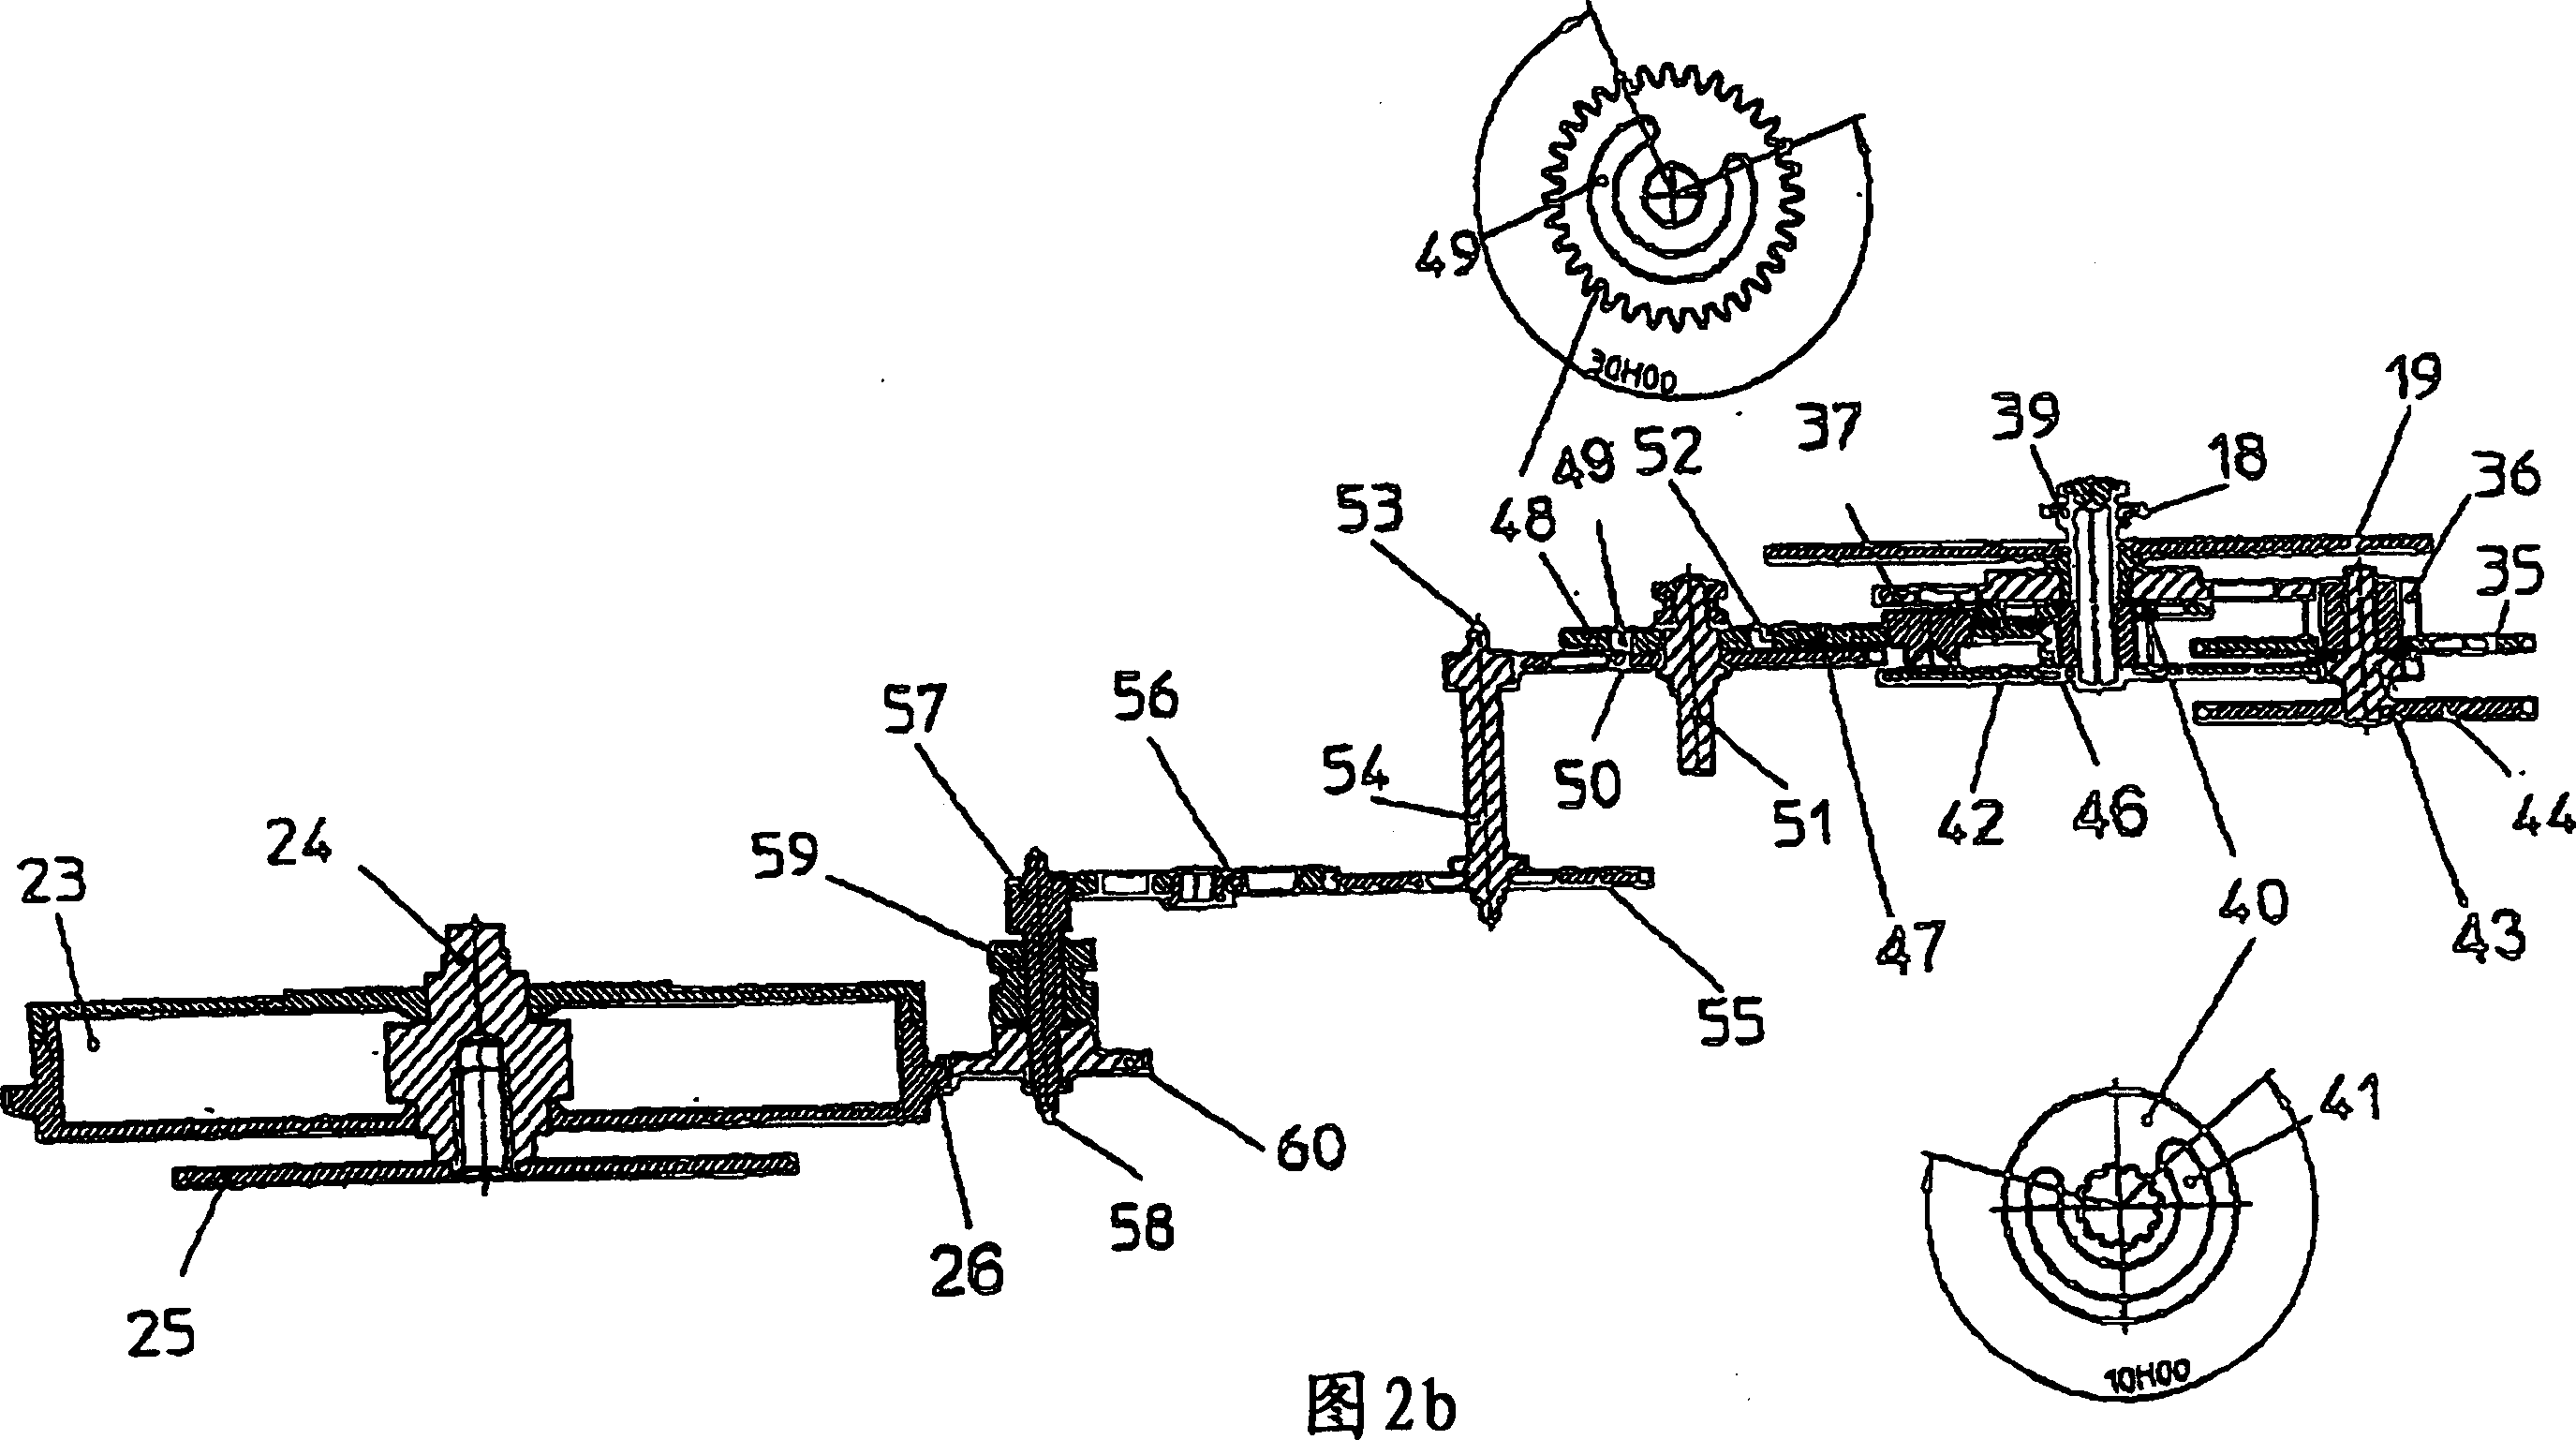 Winding state indicator mechanism for a mechanical timepiece